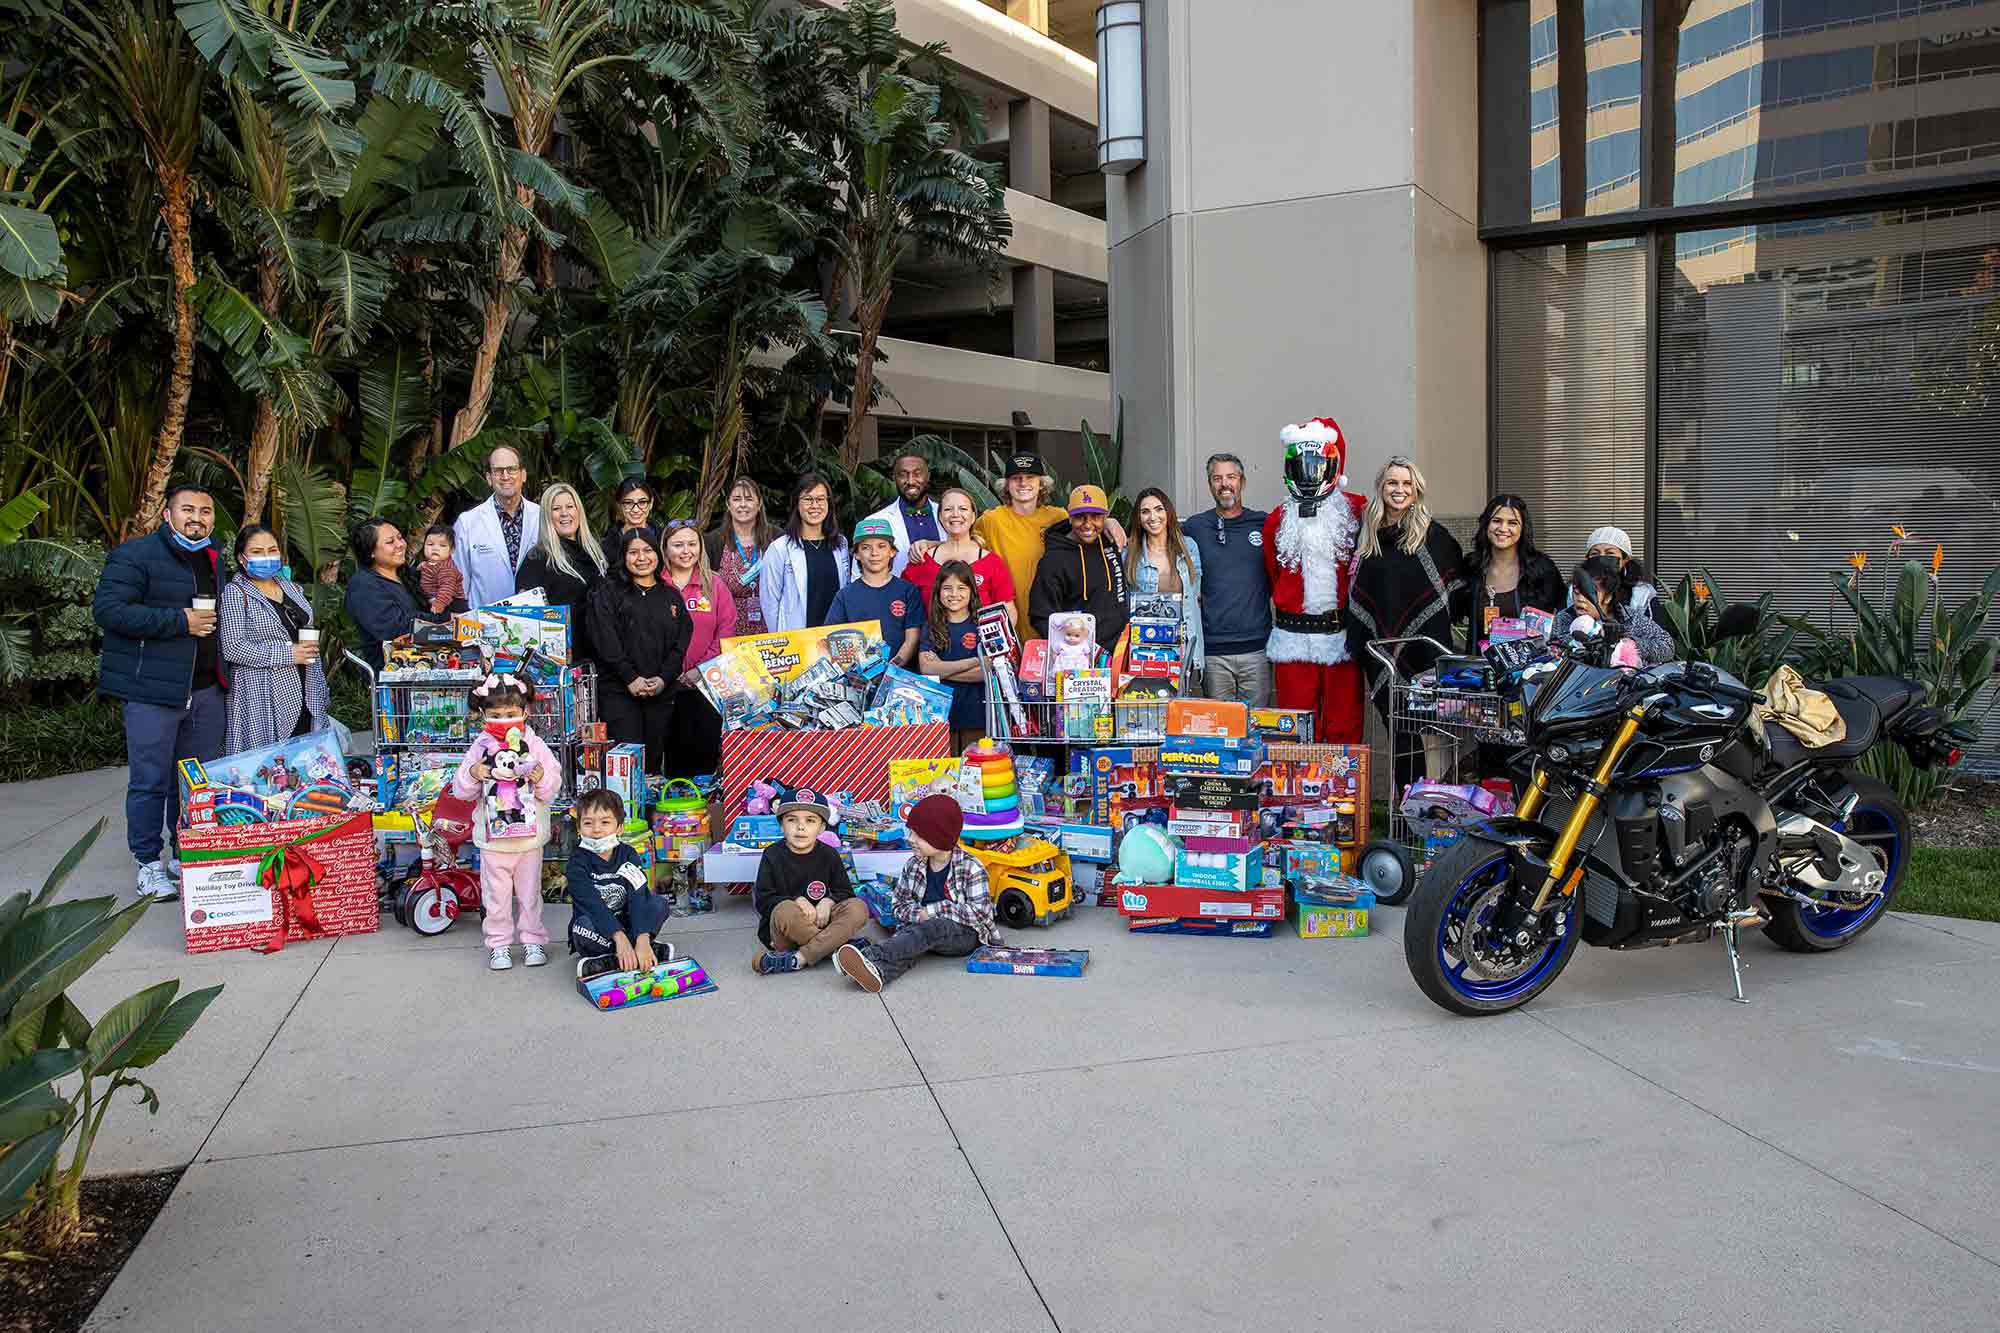 This season, Southern California youth motocross racing club Moto 4 Kids Racing campaigned its “Kids helping Kids” program to raise more toys for patients at the Children's Hospital of Orange County.